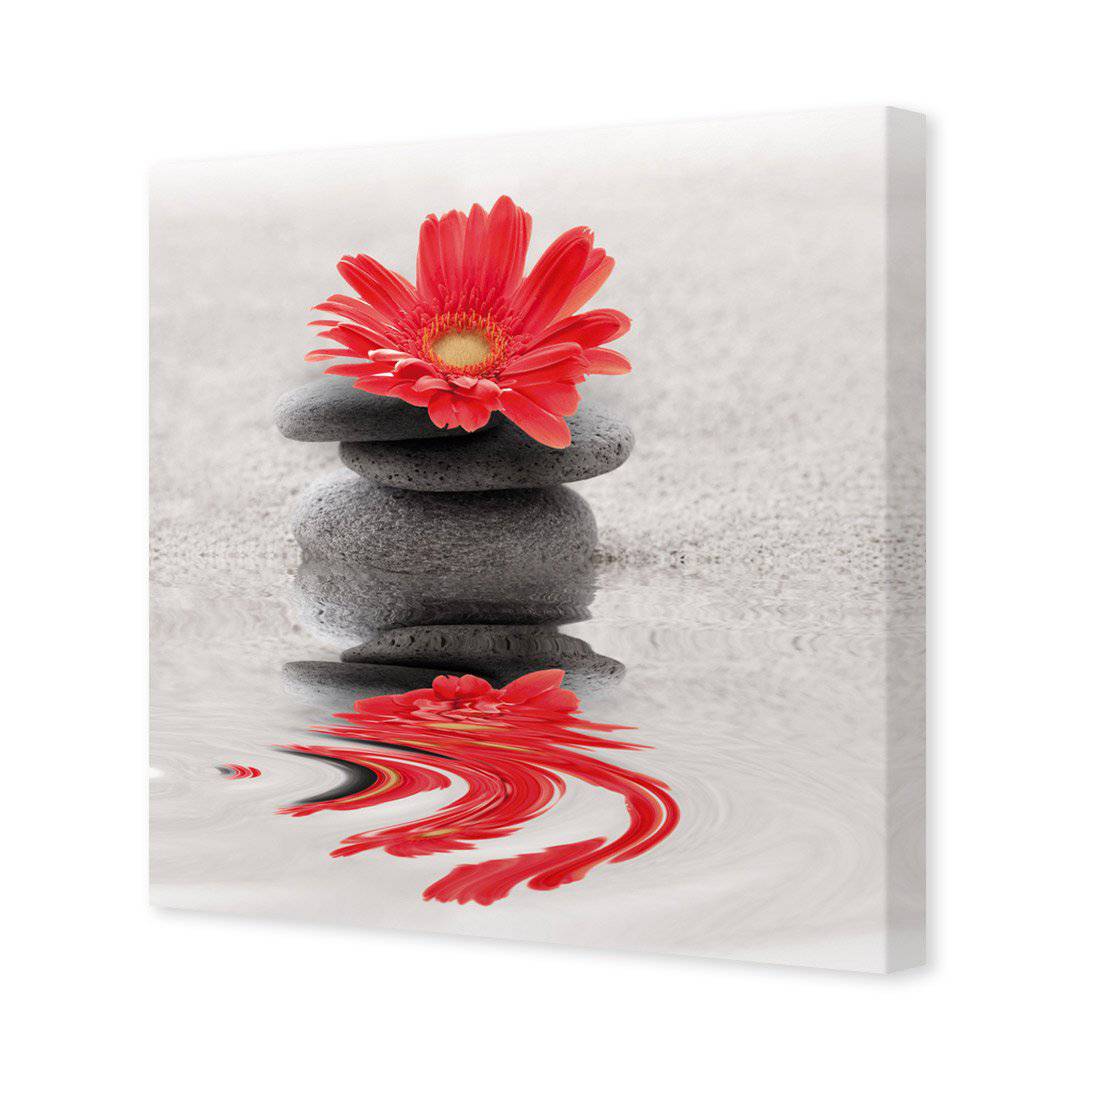 Red Flower Reflection Canvas Art-Canvas-Wall Art Designs-30x30cm-Canvas - No Frame-Wall Art Designs